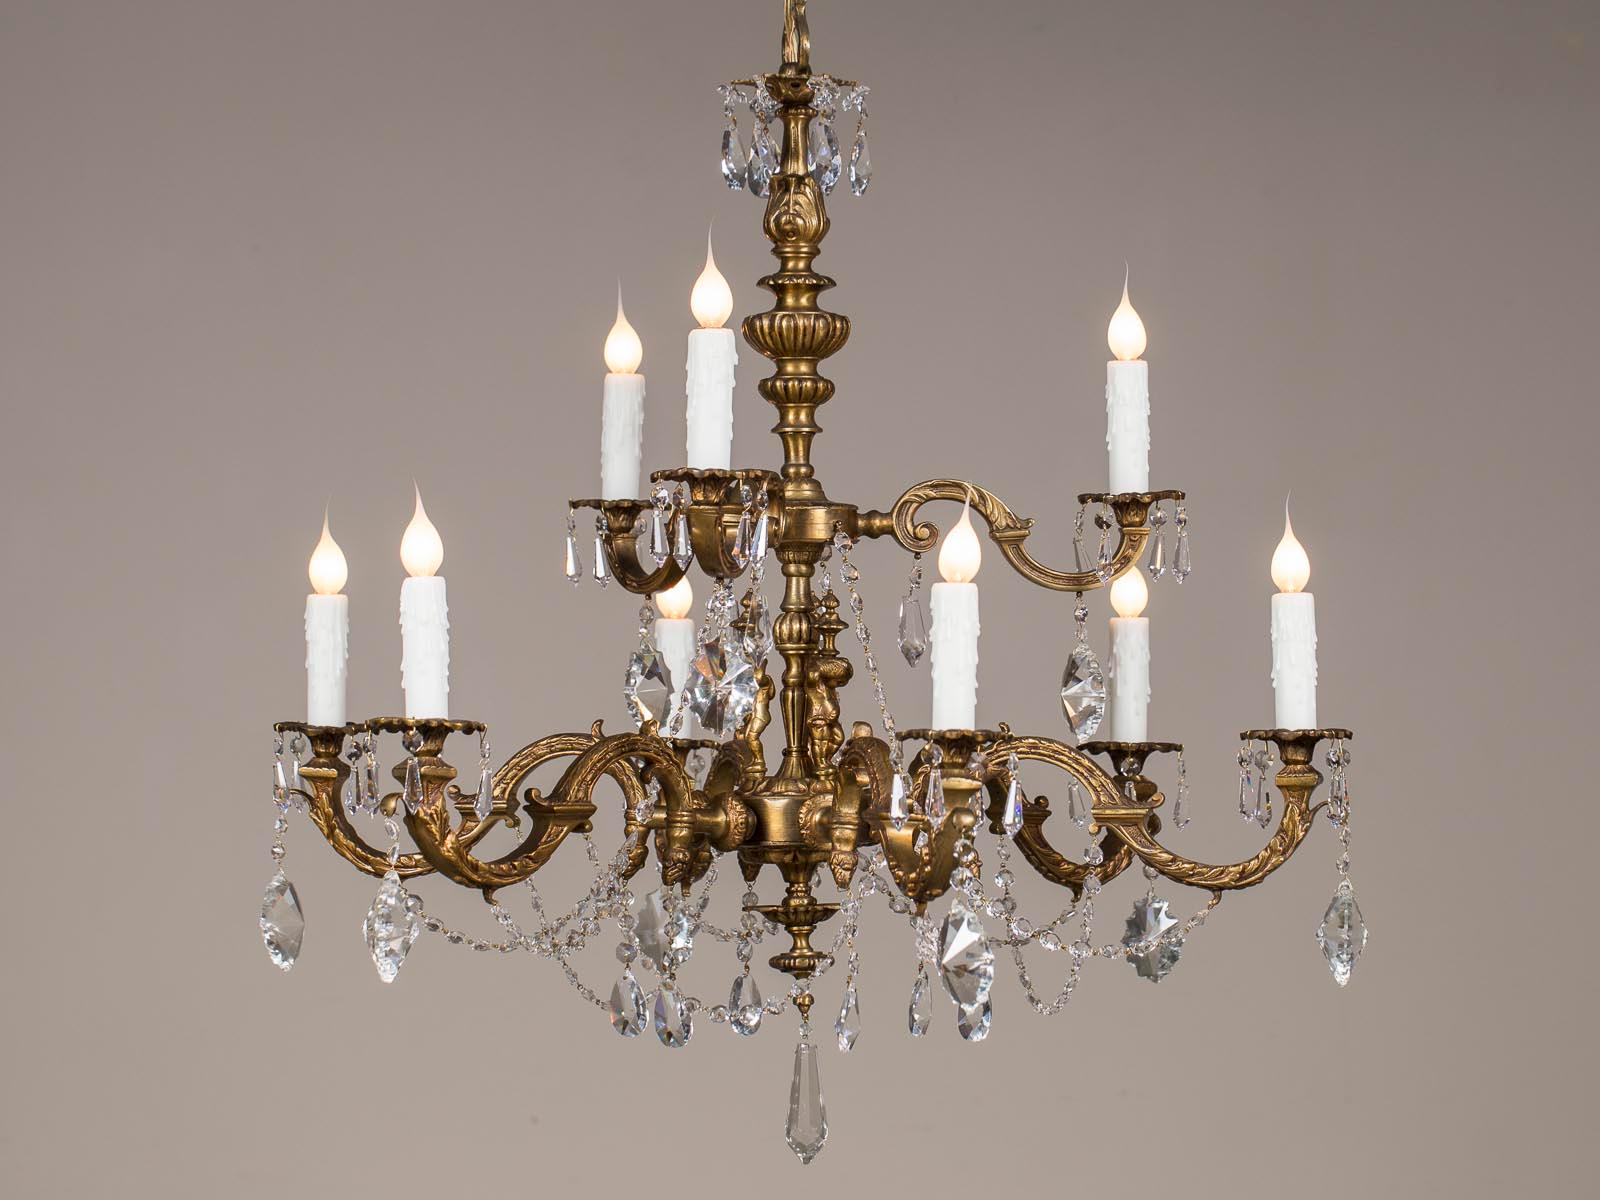 An antique French Louis XVI style bronze doré crystal chandelier from France, circa 1890. The lustrous finish of the gilded bronze provides a great background for the brilliance of the cut crystal drops and crystal swags dressing this French